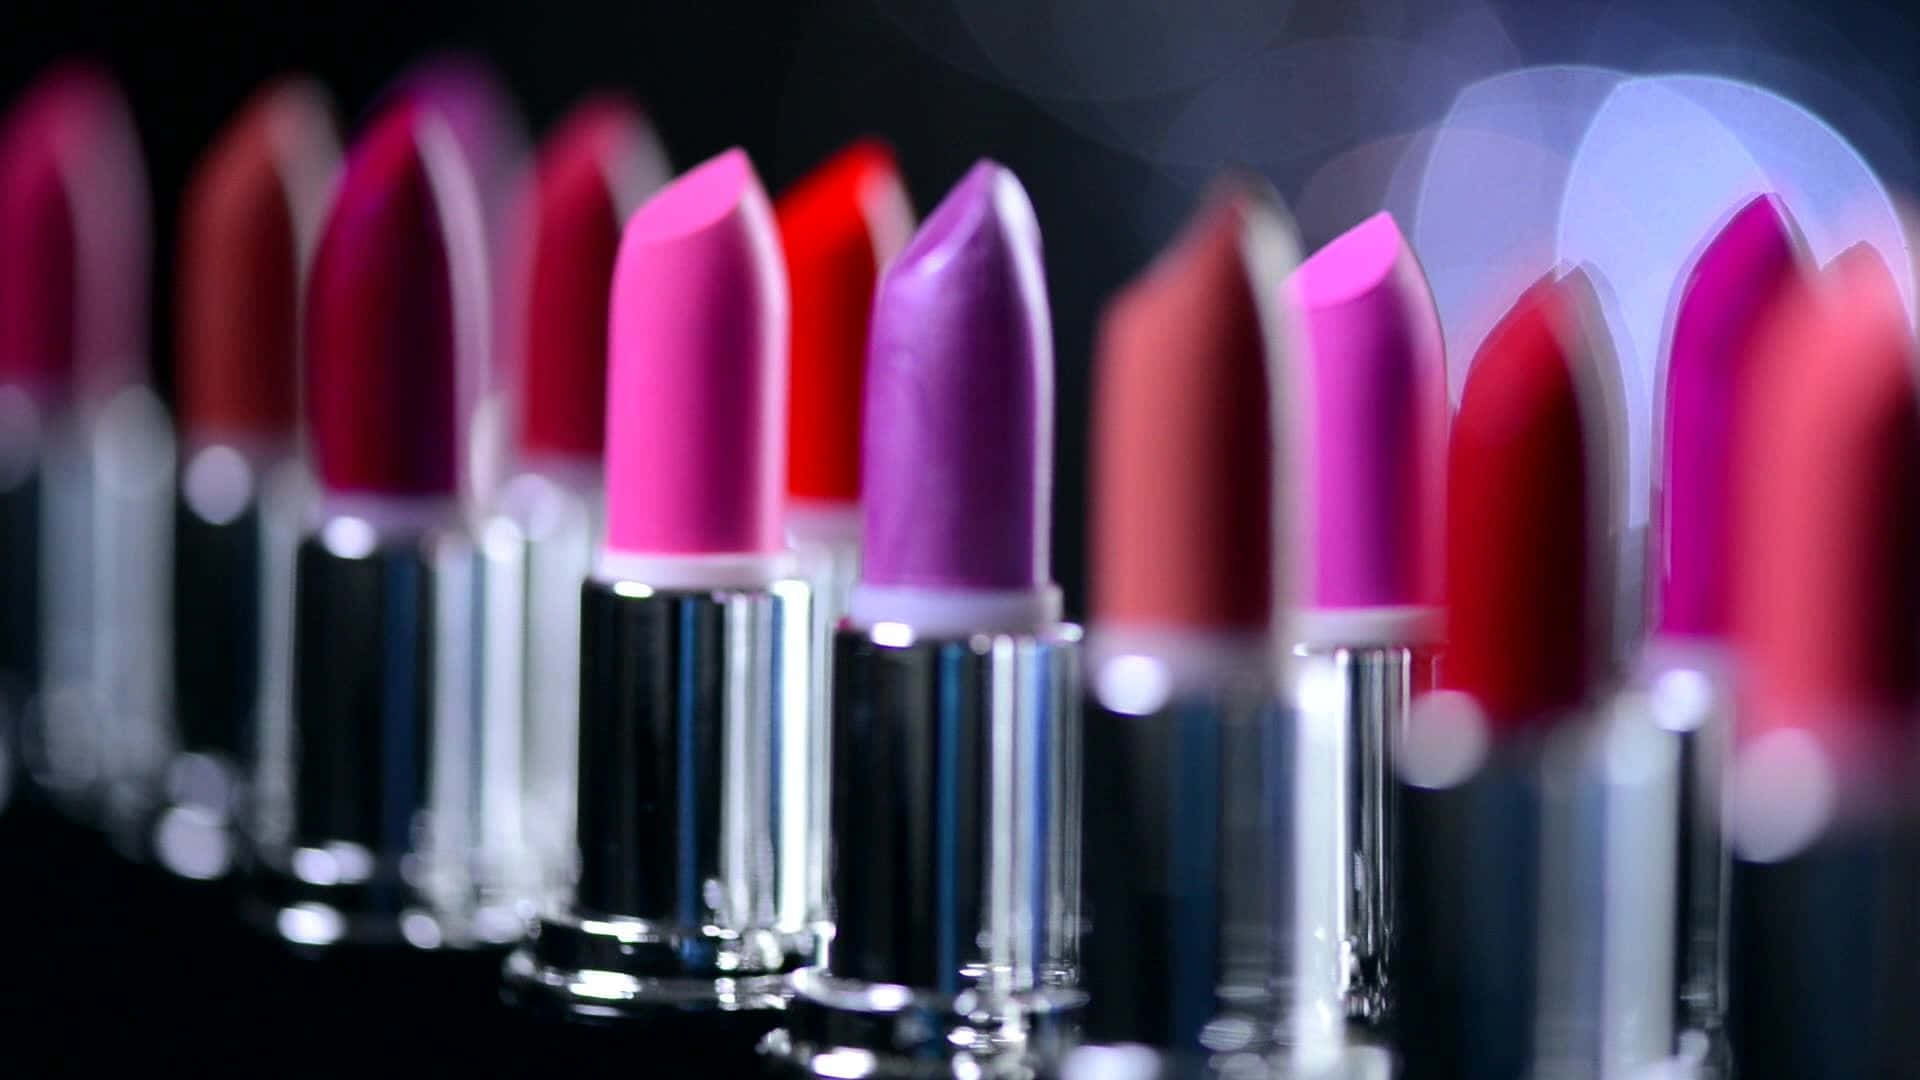 Get creative and make your mark with MAC Cosmetics!